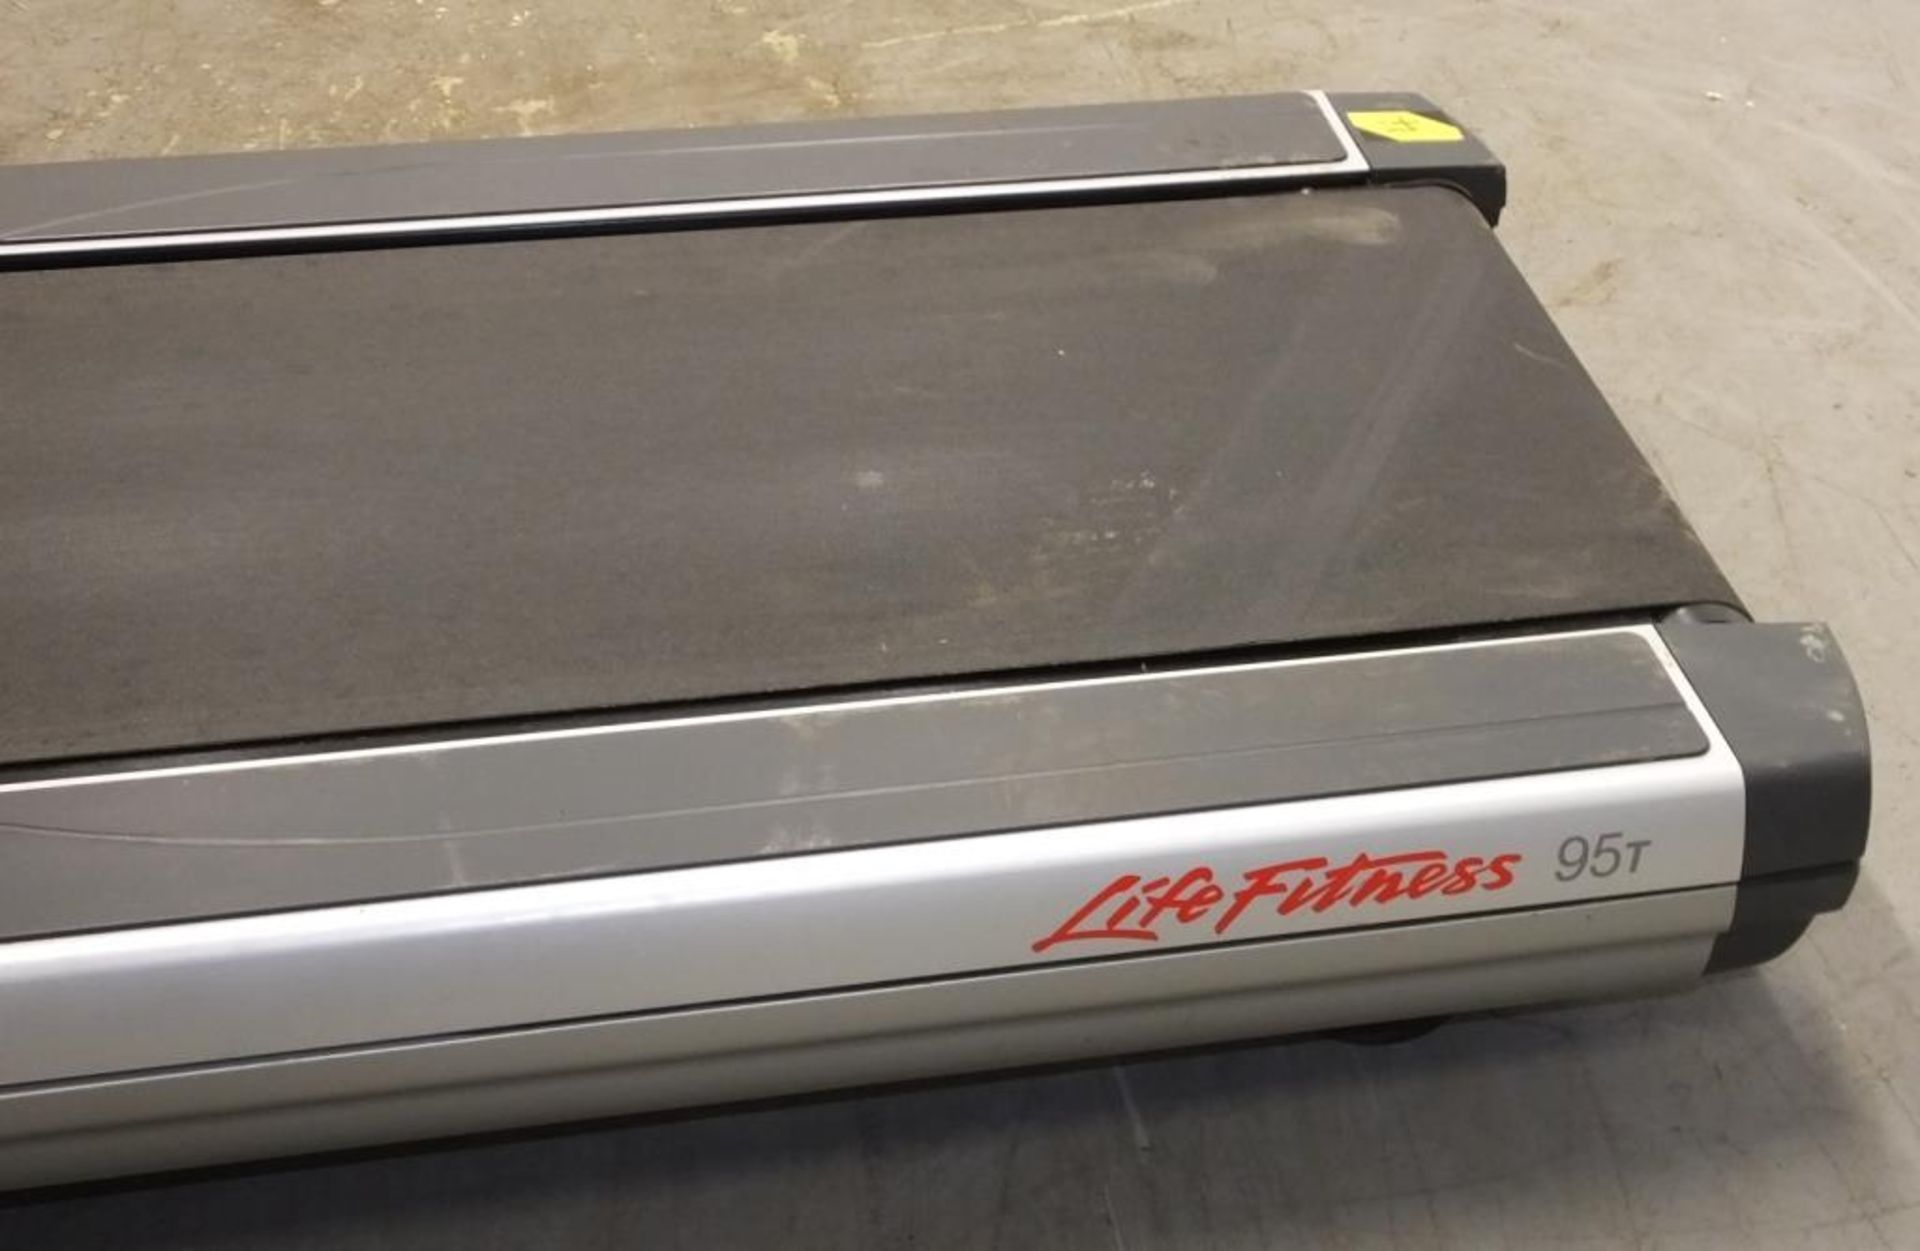 Life Fitness 95T FlexDeck shock absorption system treadmill - powers up - functionality untested - Image 4 of 20